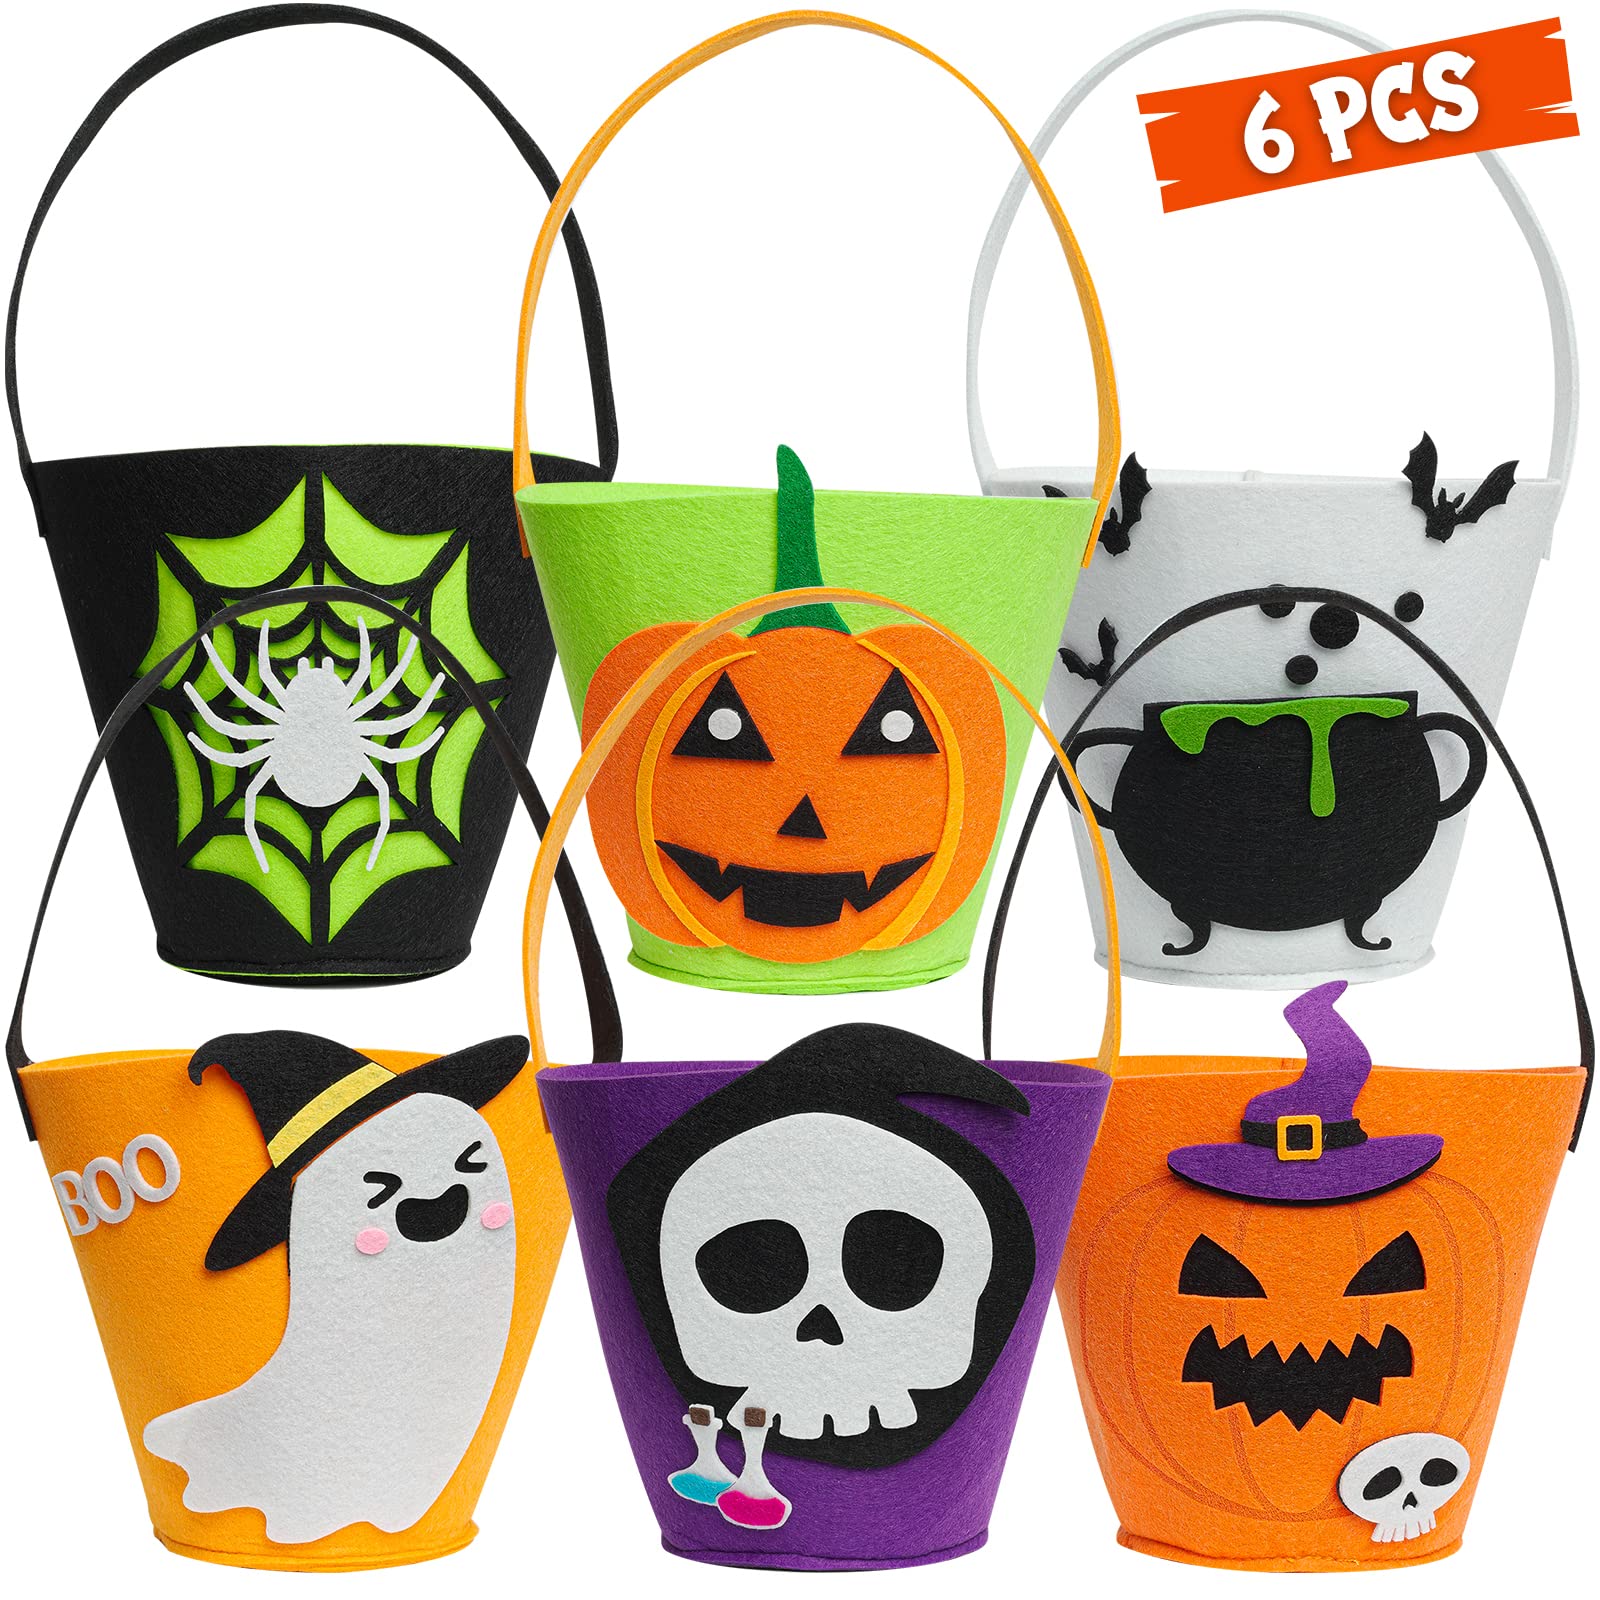 6 Pack Candy Felt Holder Buckets for Kids, Halloween Boo baskets for Trick or Treating Bags, Halloween Candy Pails, Halloween Snacks, Halloween Goodie Bags, Bucket Decoration, Spooky Baskets